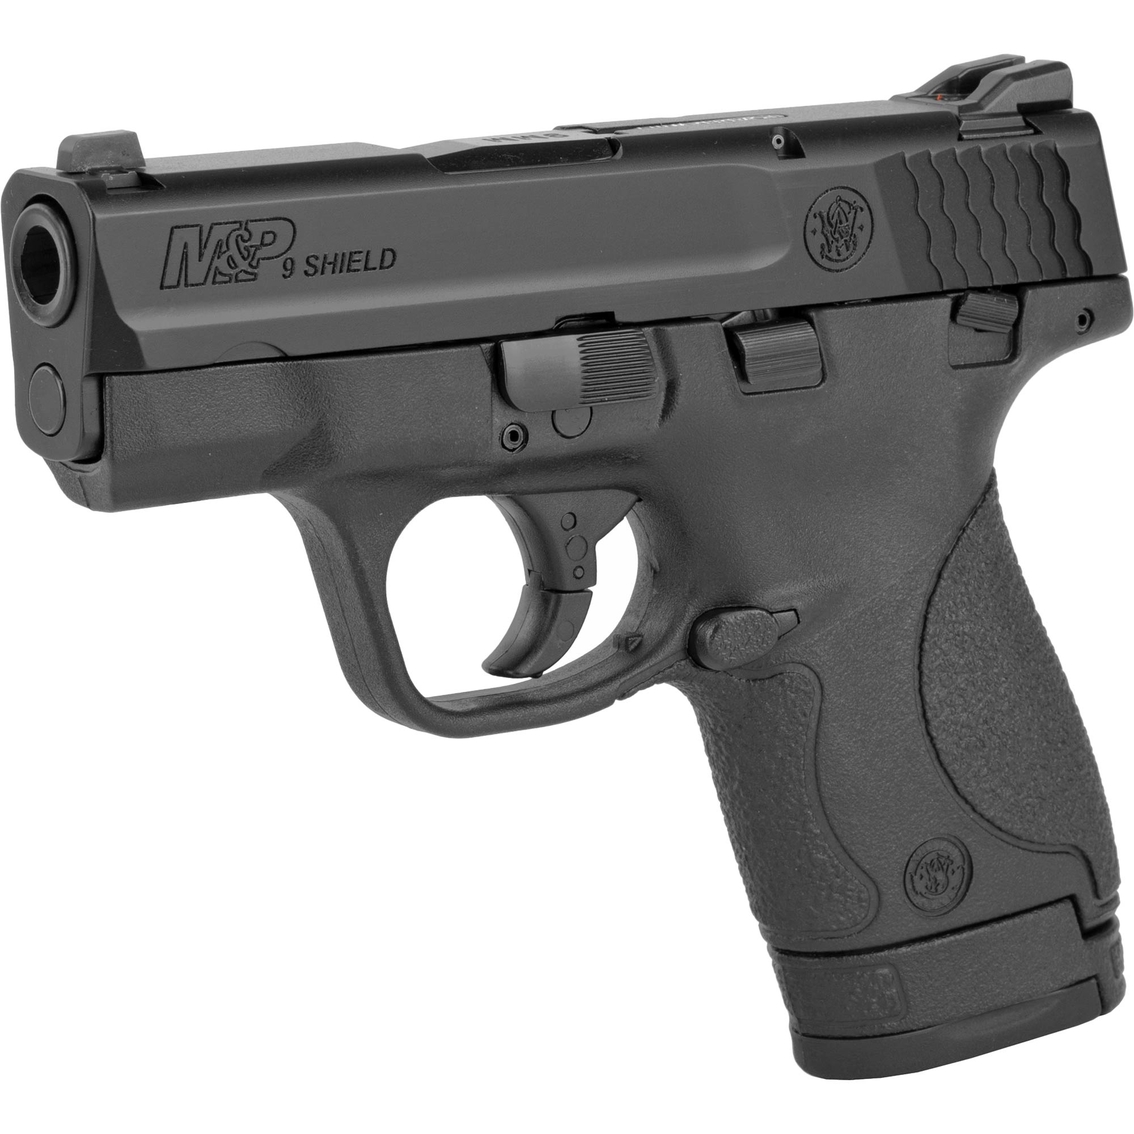 S&W Shield 9MM 3.1 in. Barrel 8 Rds 2-Mags Pistol Black with Thumb Safety - Image 3 of 3